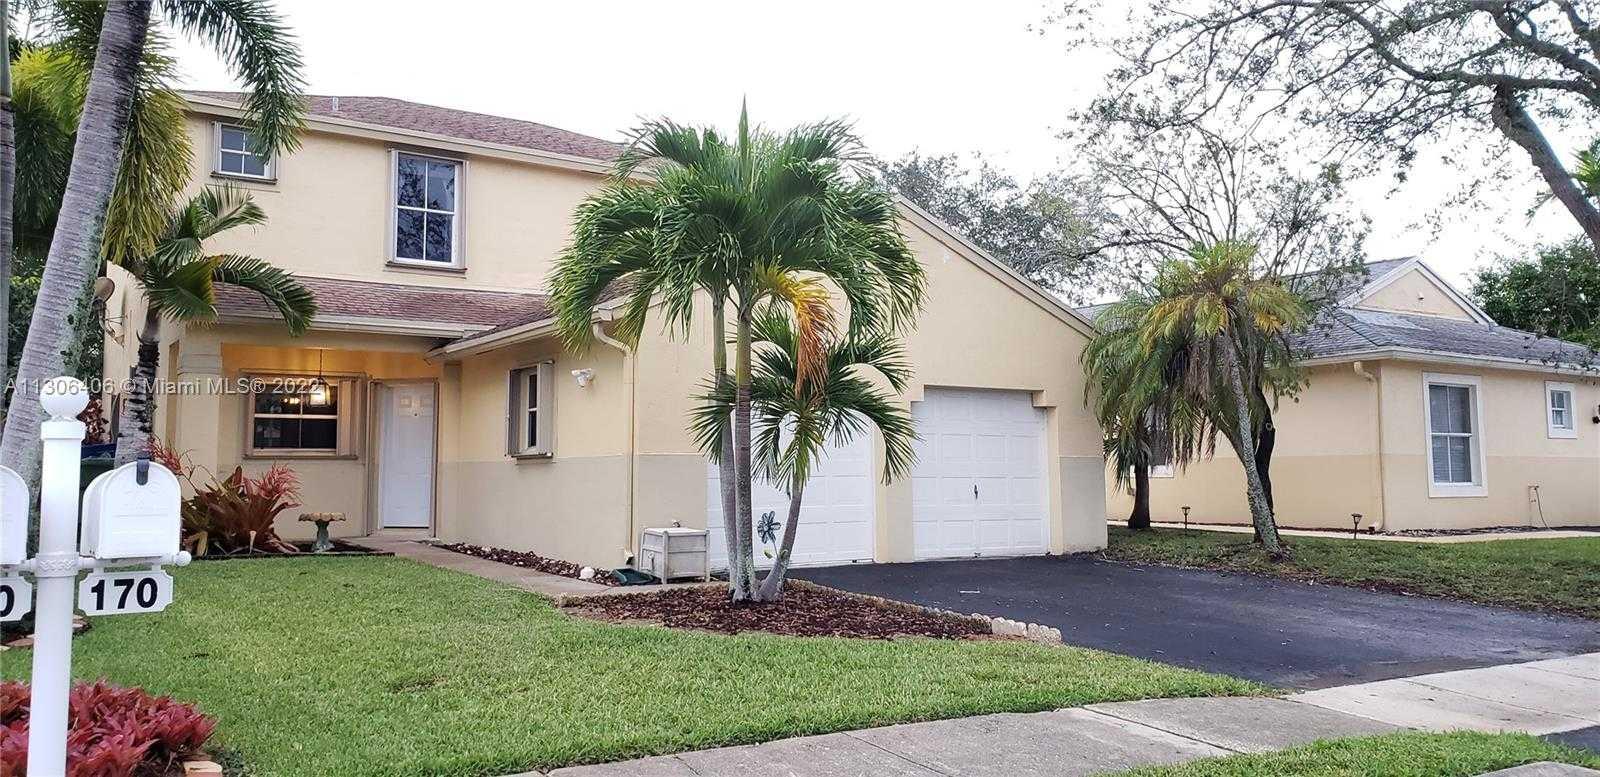 170 207TH WY, Pembroke Pines, Single Family Home,  for rent, Nuray Tokcan Arik, Mcdonald Realty